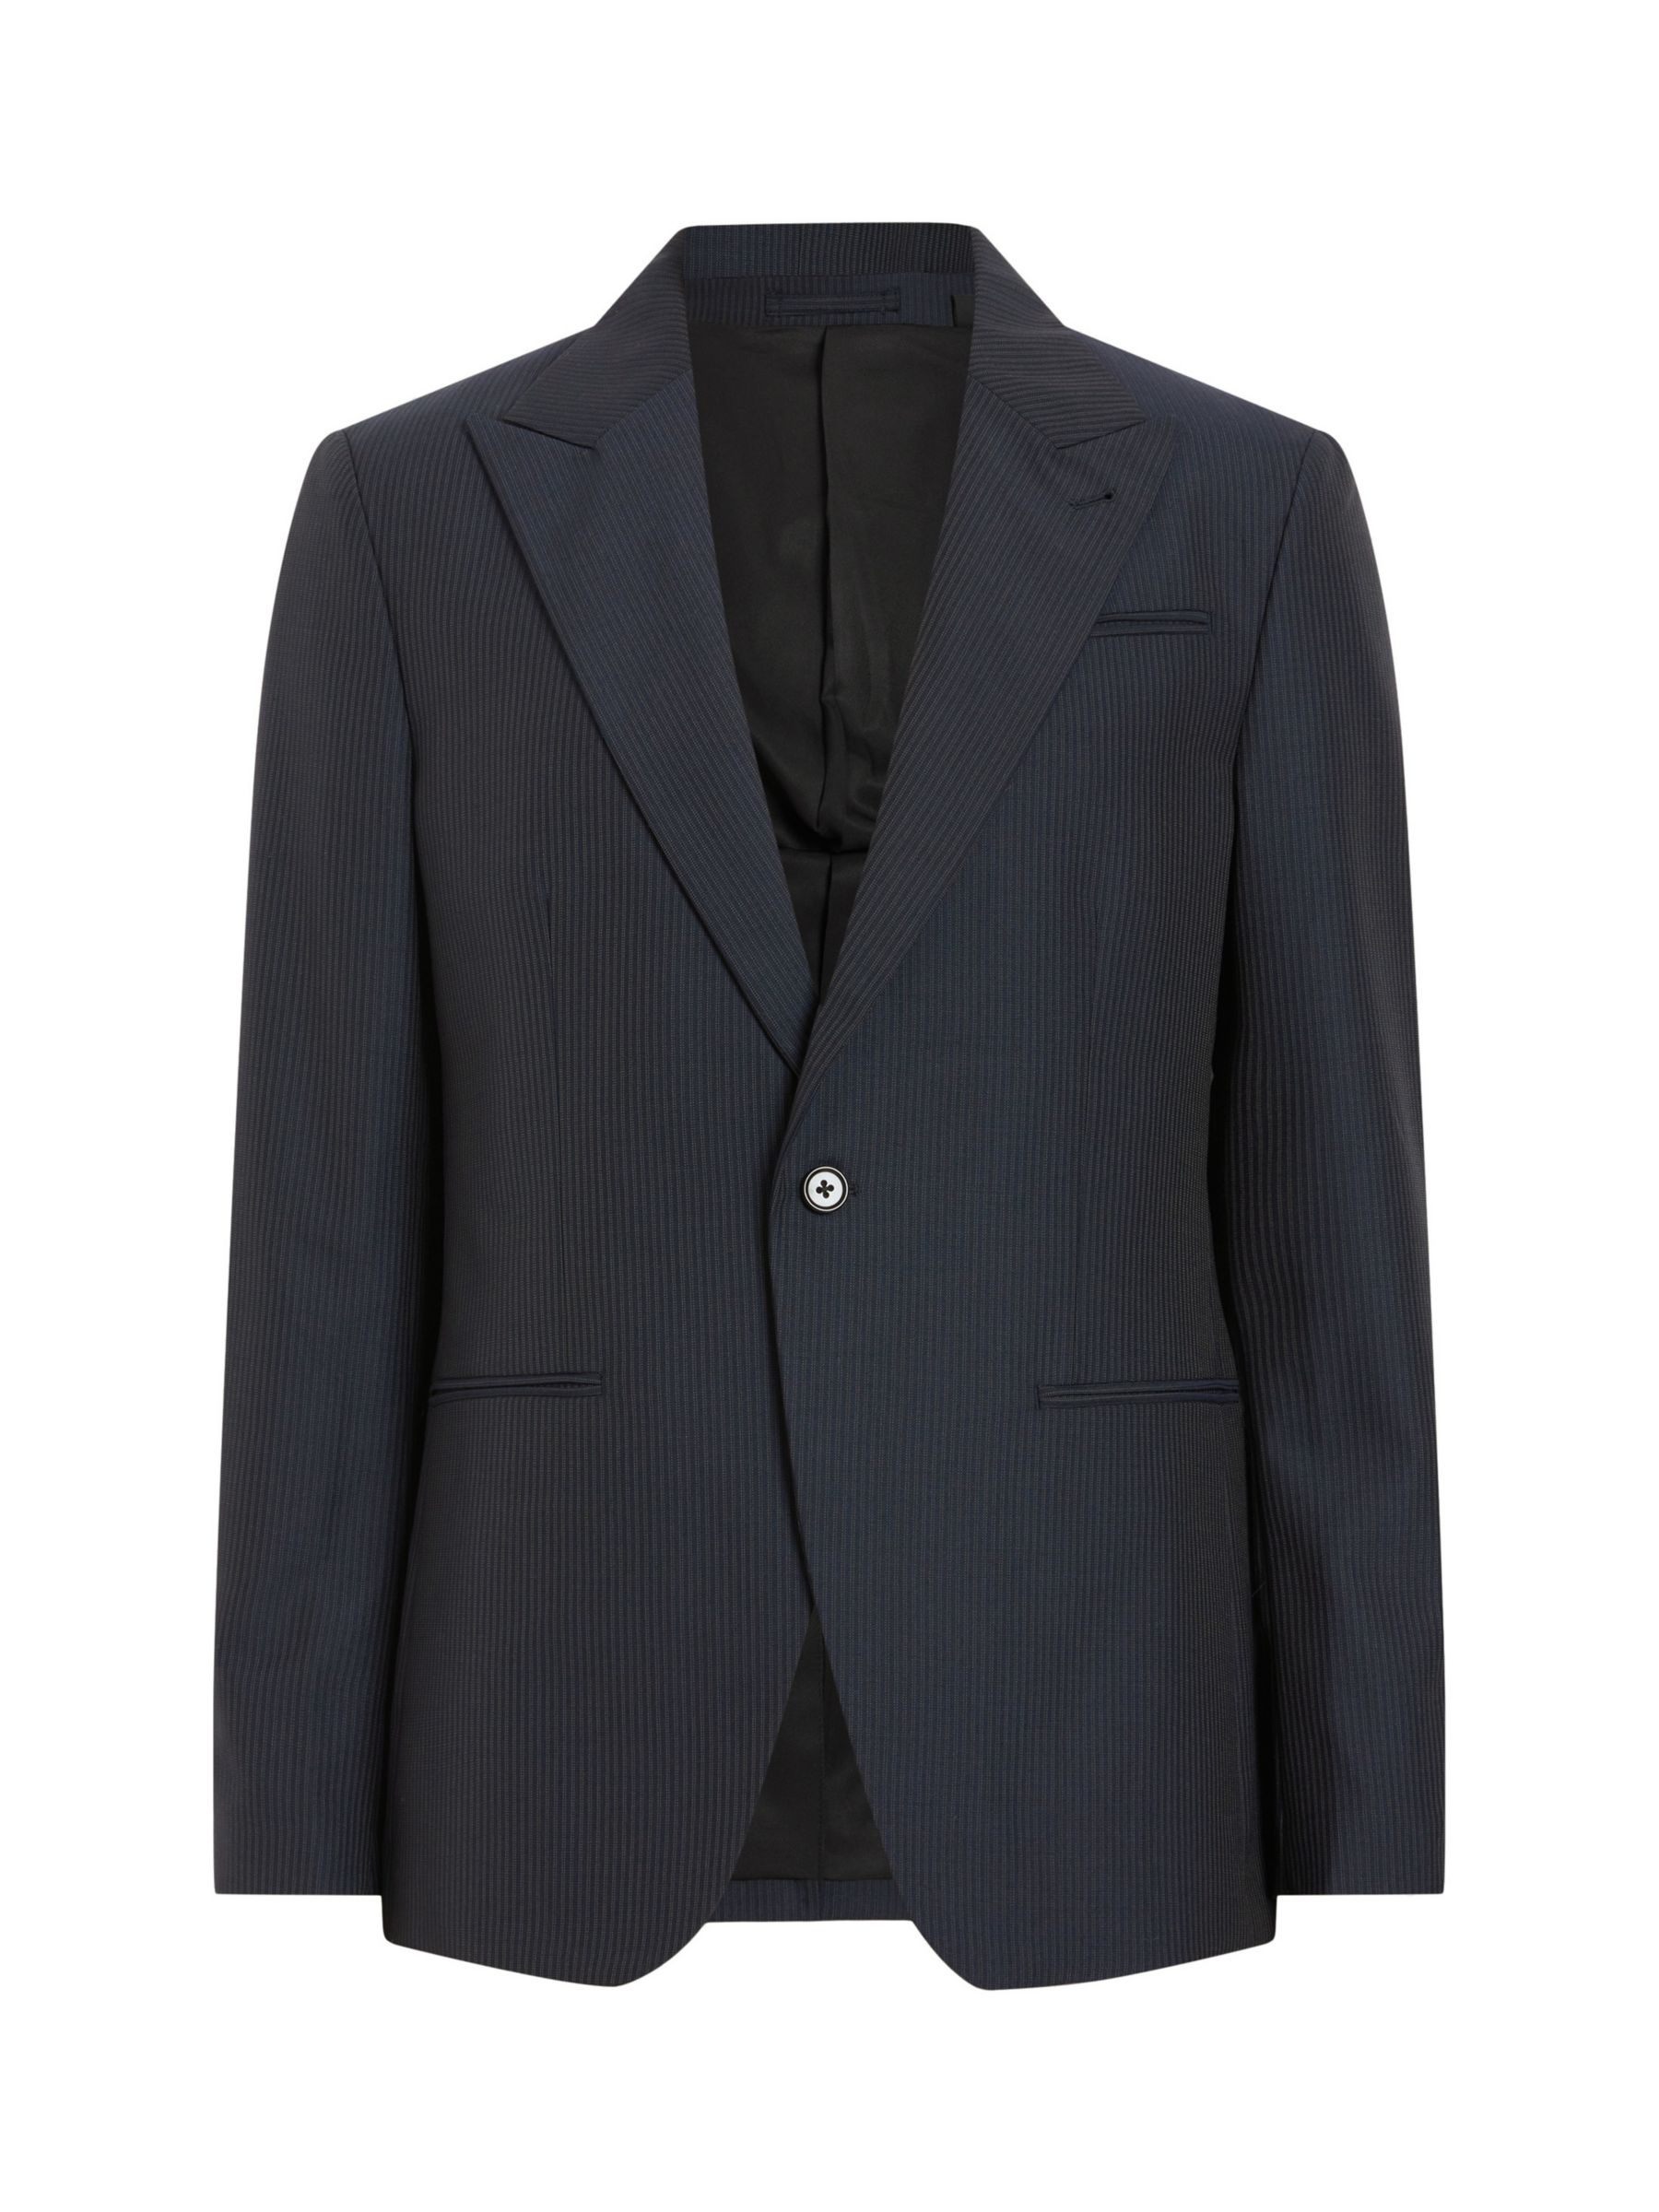 AllSaints Howling Relaxed Fit Wool Blend Suit Jacket, Ink Blue, 34